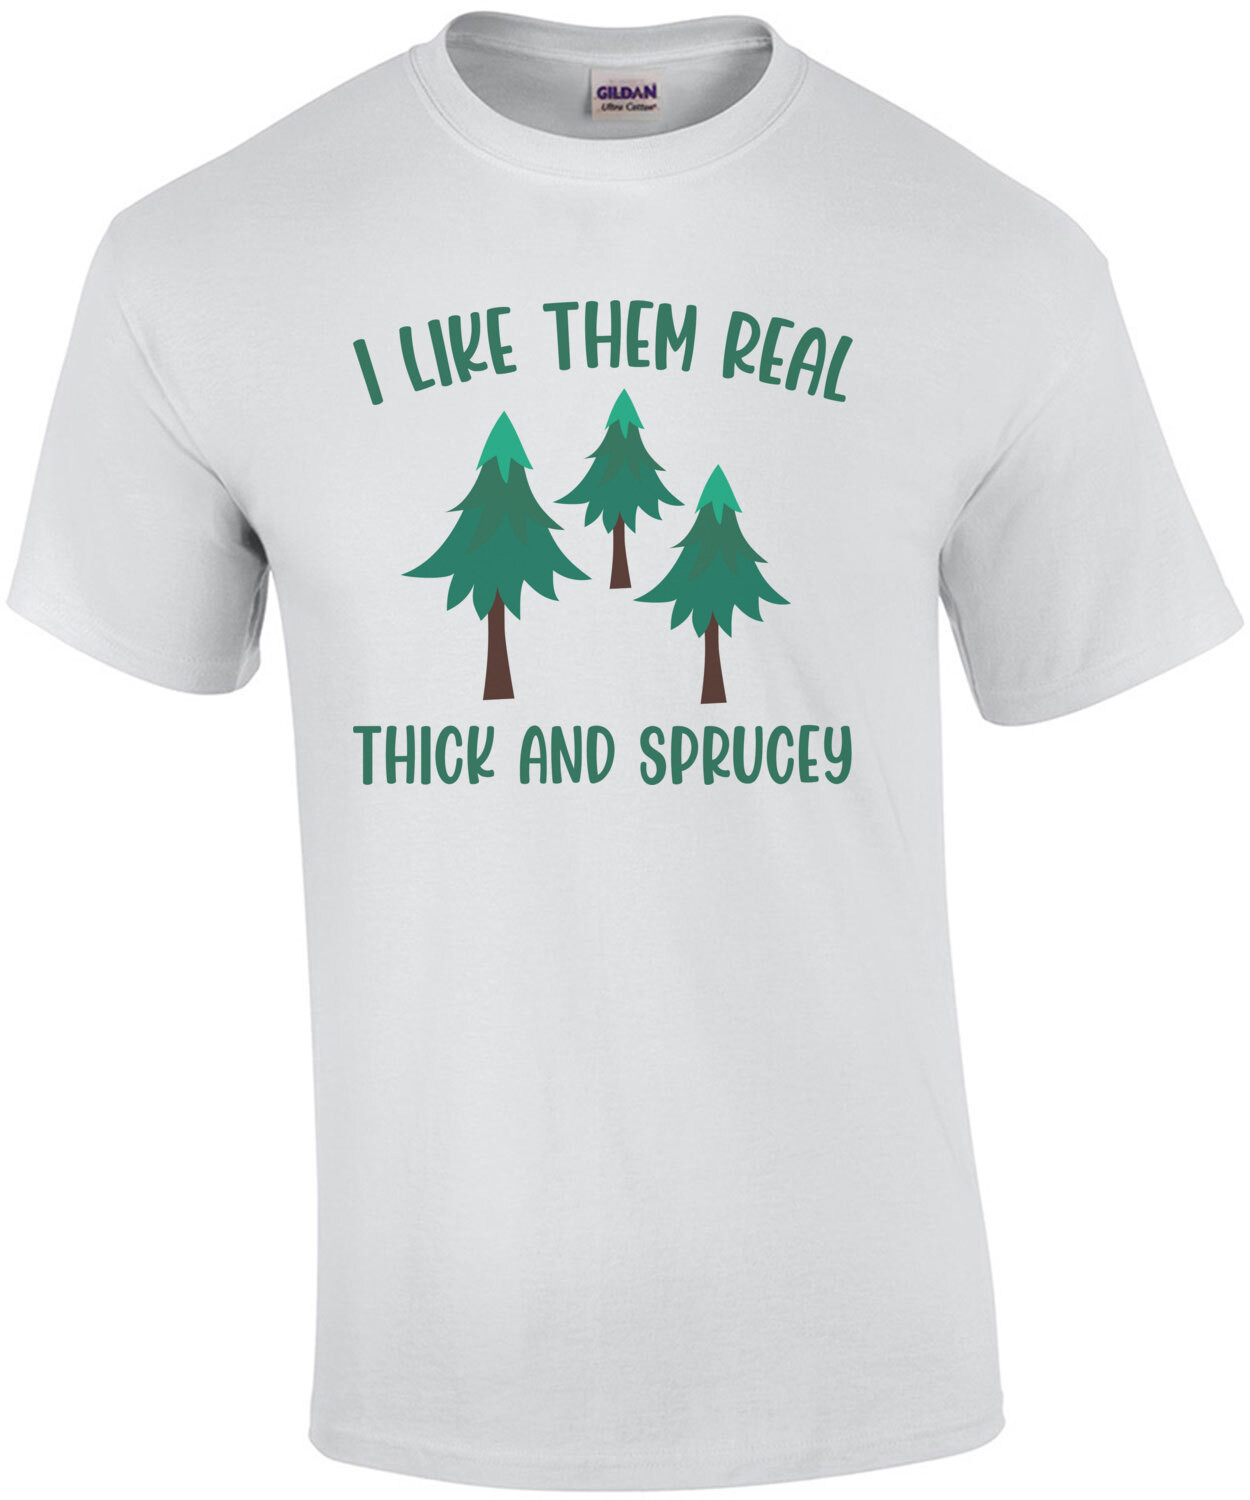 I like them real thick and sprucey - Funny Christmas Tree T-Shirt